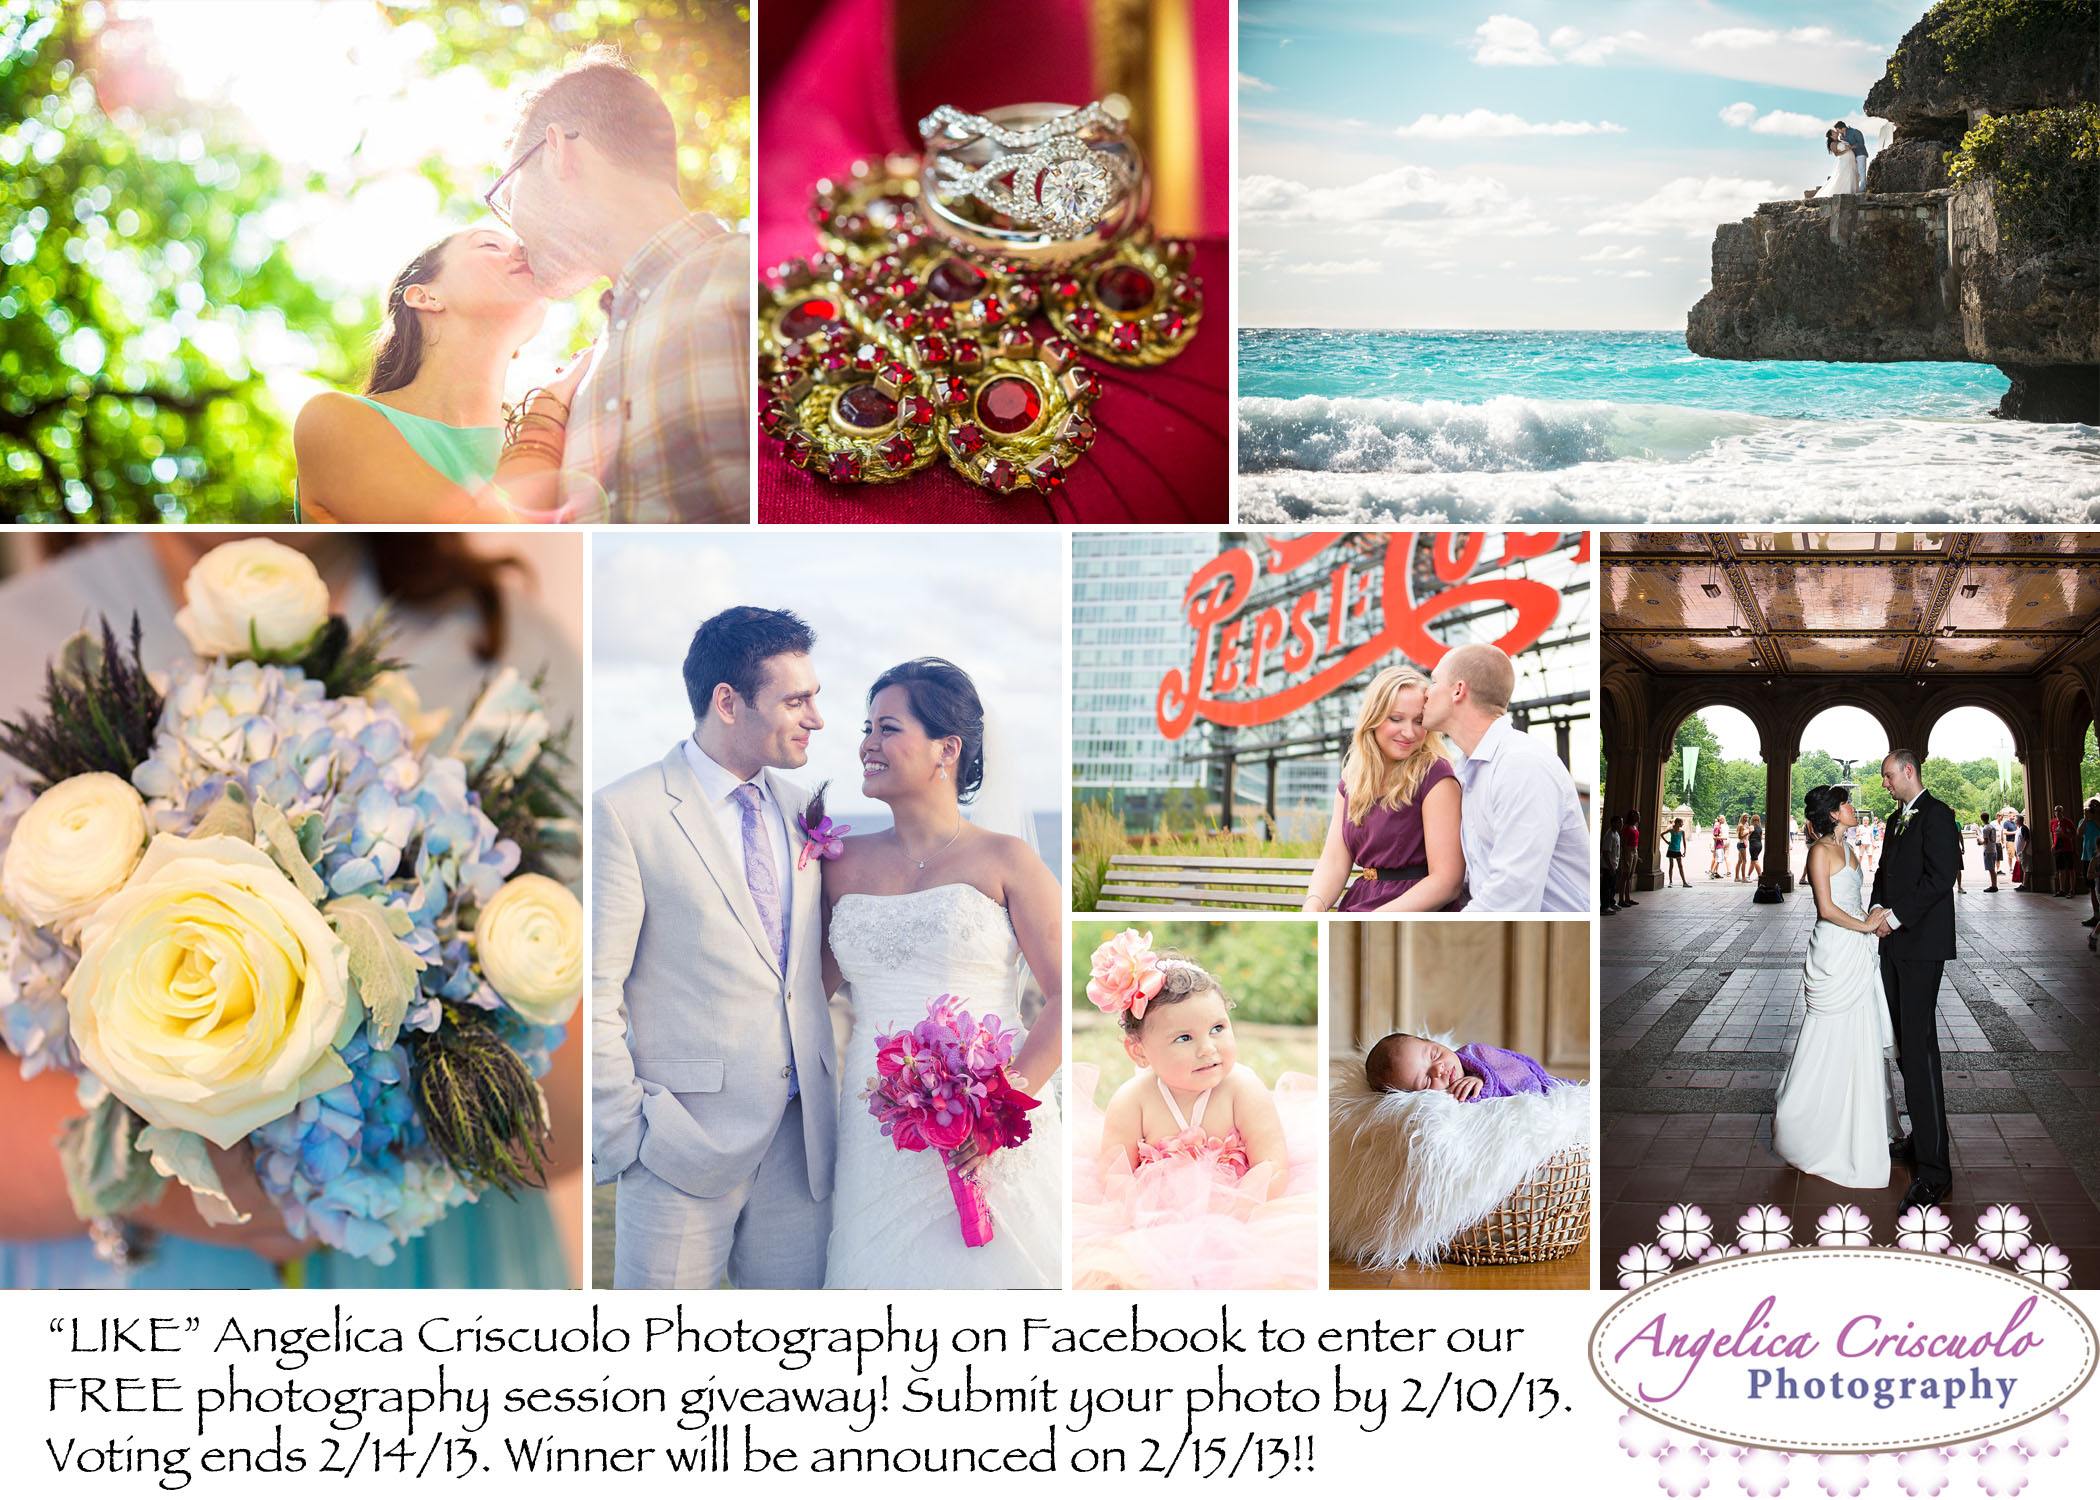 Facebook Fan photo session giveaway by Angelica Criscuolo Photography